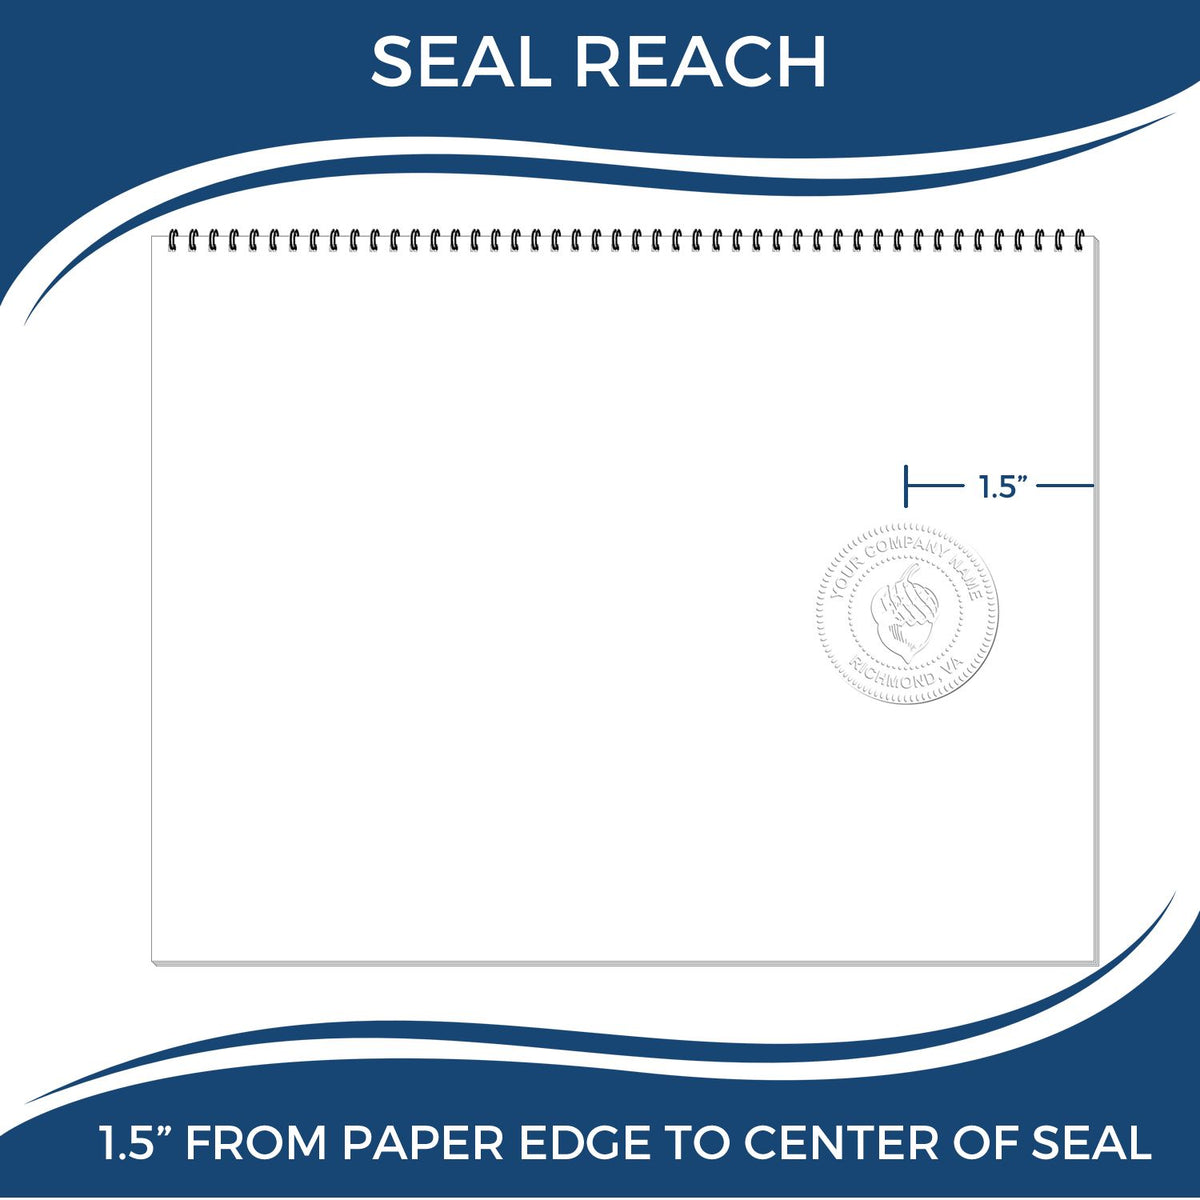 An infographic showing the seal reach which is represented by a ruler and a miniature seal image of the Gift New York Geologist Seal